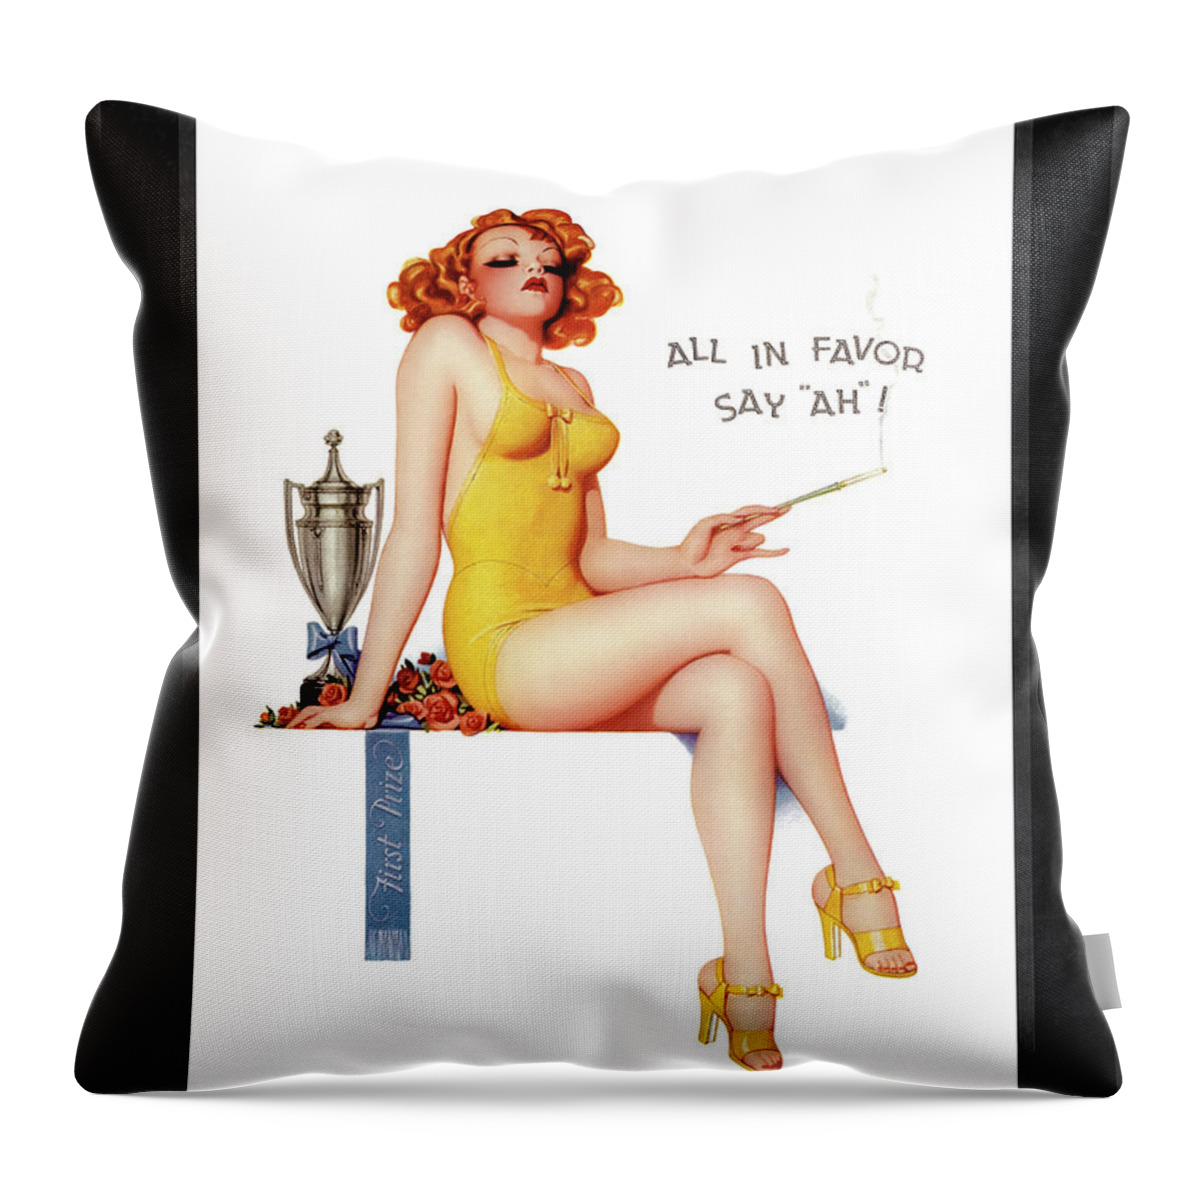 All In Favor Say Ah Throw Pillow featuring the painting All In Favor Say Ah by Enoch Bolles Vintage Illustration Xzendor7 Art Reproductions by Rolando Burbon